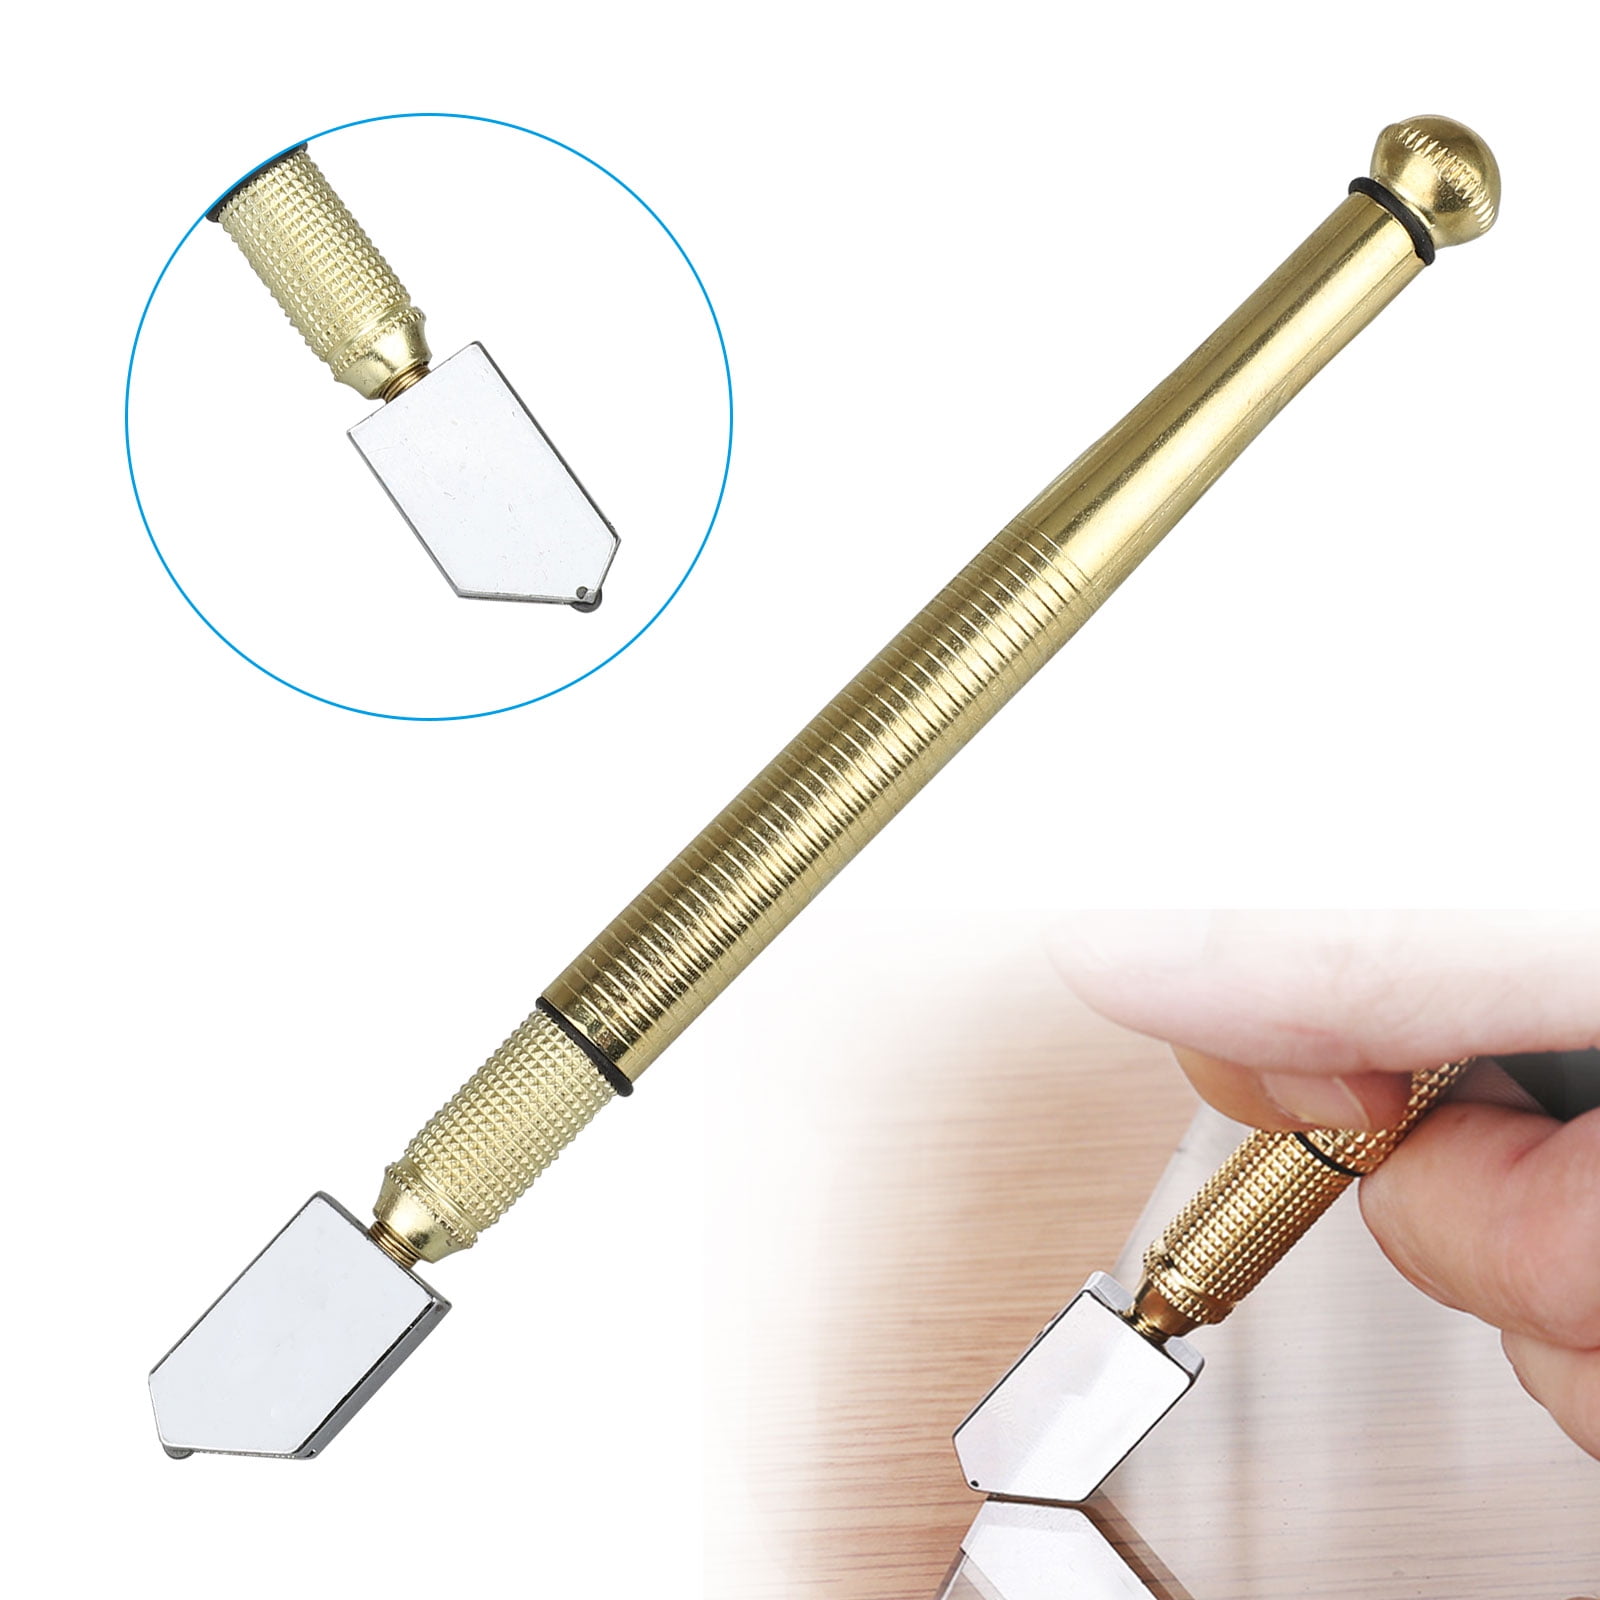  Pencil Shape Glass Cutters with Range 5-12mm Cutter Head Finger  Stop Glass Cutters Oil Feed Glass Cutters with Dropper for Thick Glass  Mosaic and Tiles